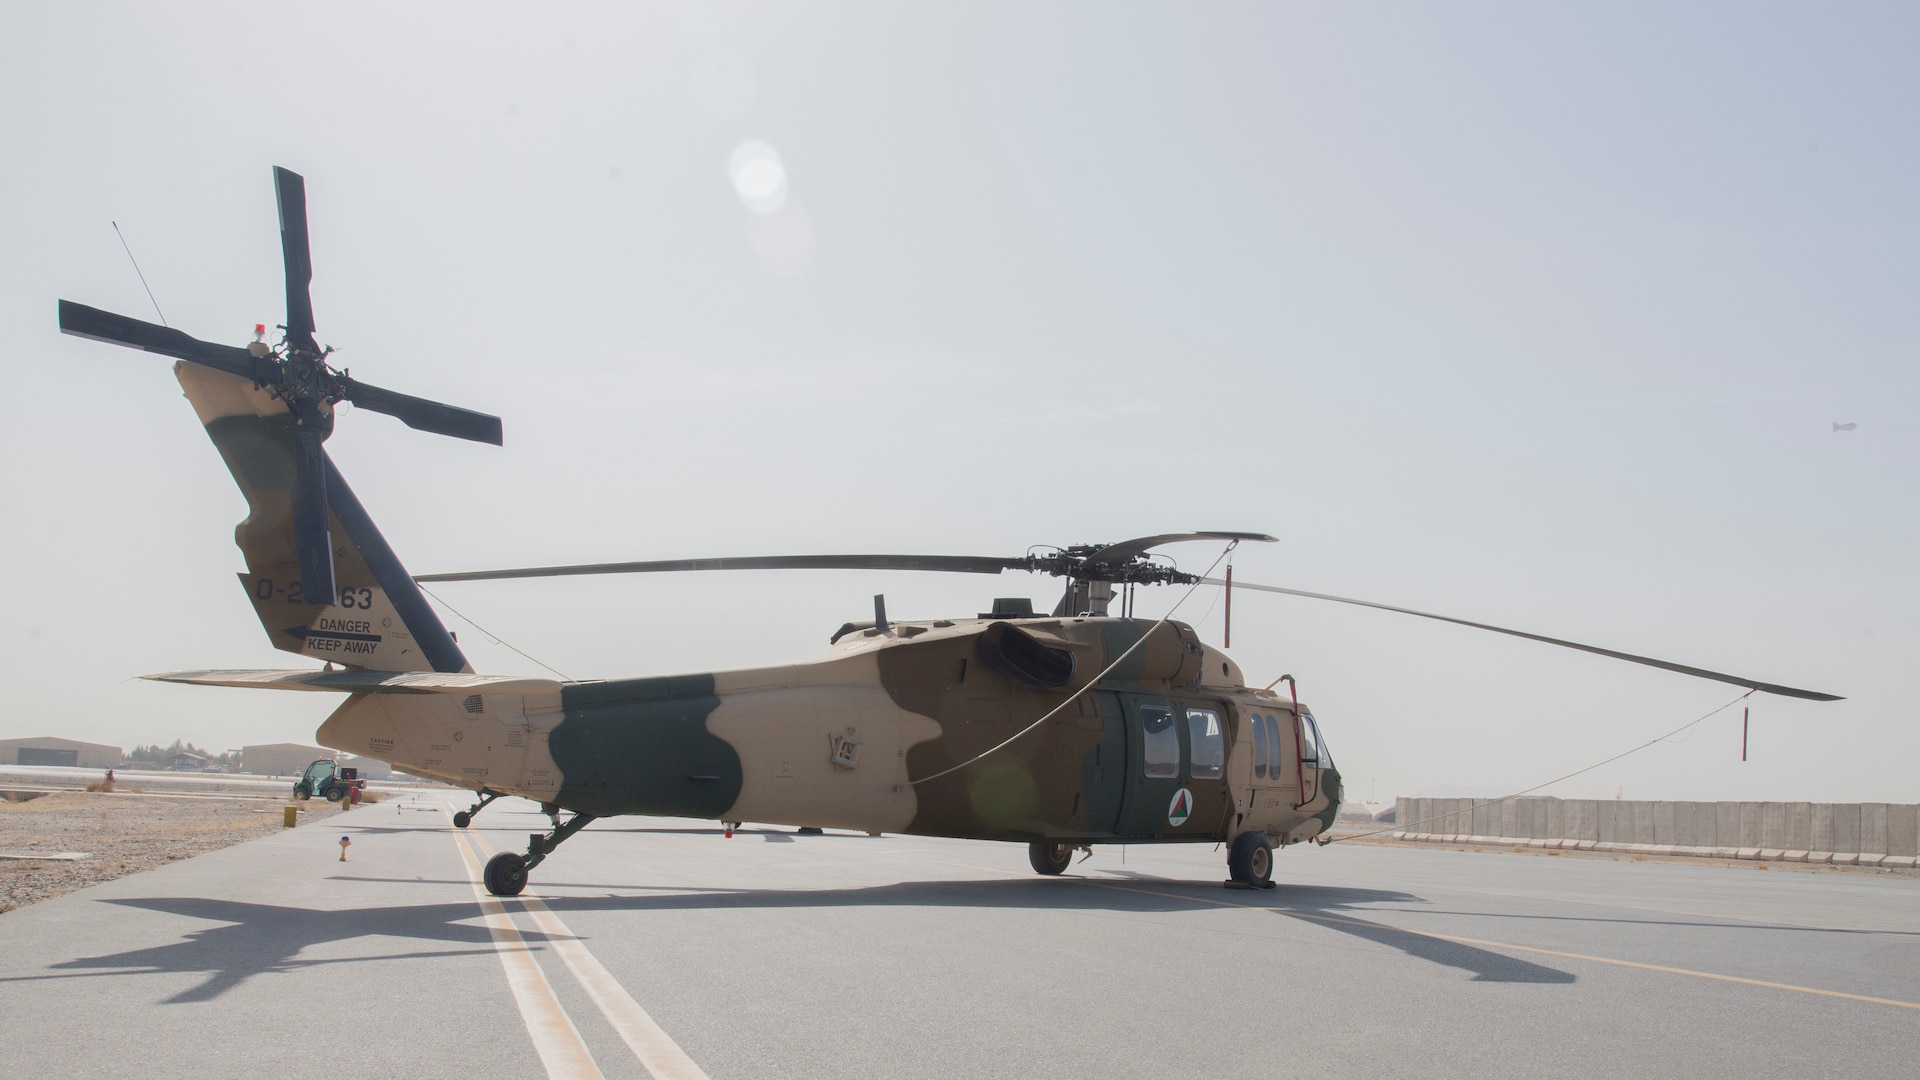 An Afghan Air Force UH-60 February 18, 2018, at Kandahar Air Wing, Afghanistan. The primary mission of the UH-60 will be troop and cargo transport. (U.S. Air Force photo by Staff Sgt. Jared J. Duhon)